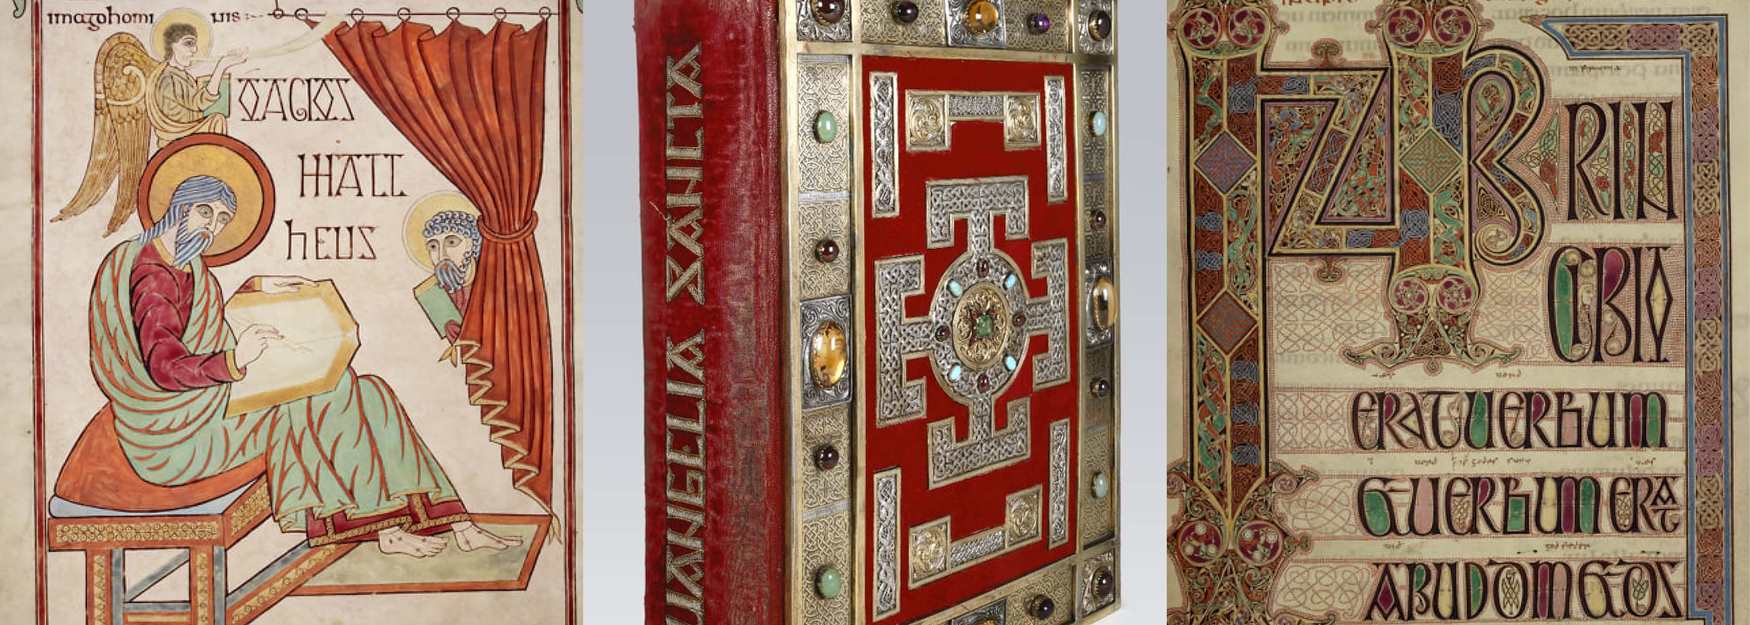 Lindisfarne Gospels pages and cover of book